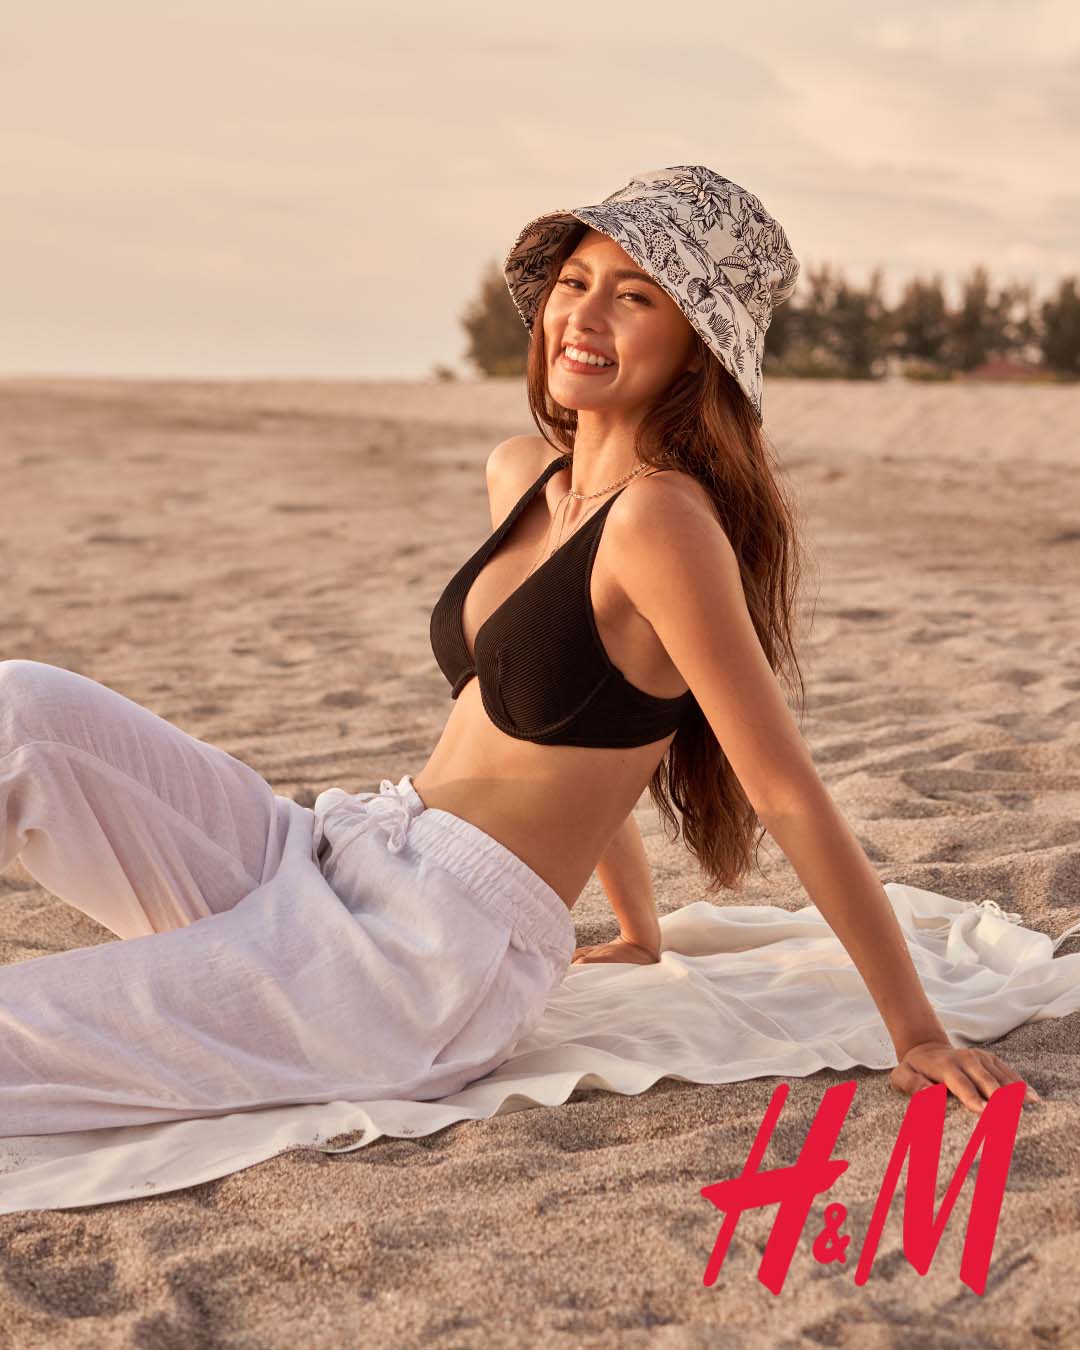 Kim Chiu Is the New Face of H&M Philippines Preview.ph